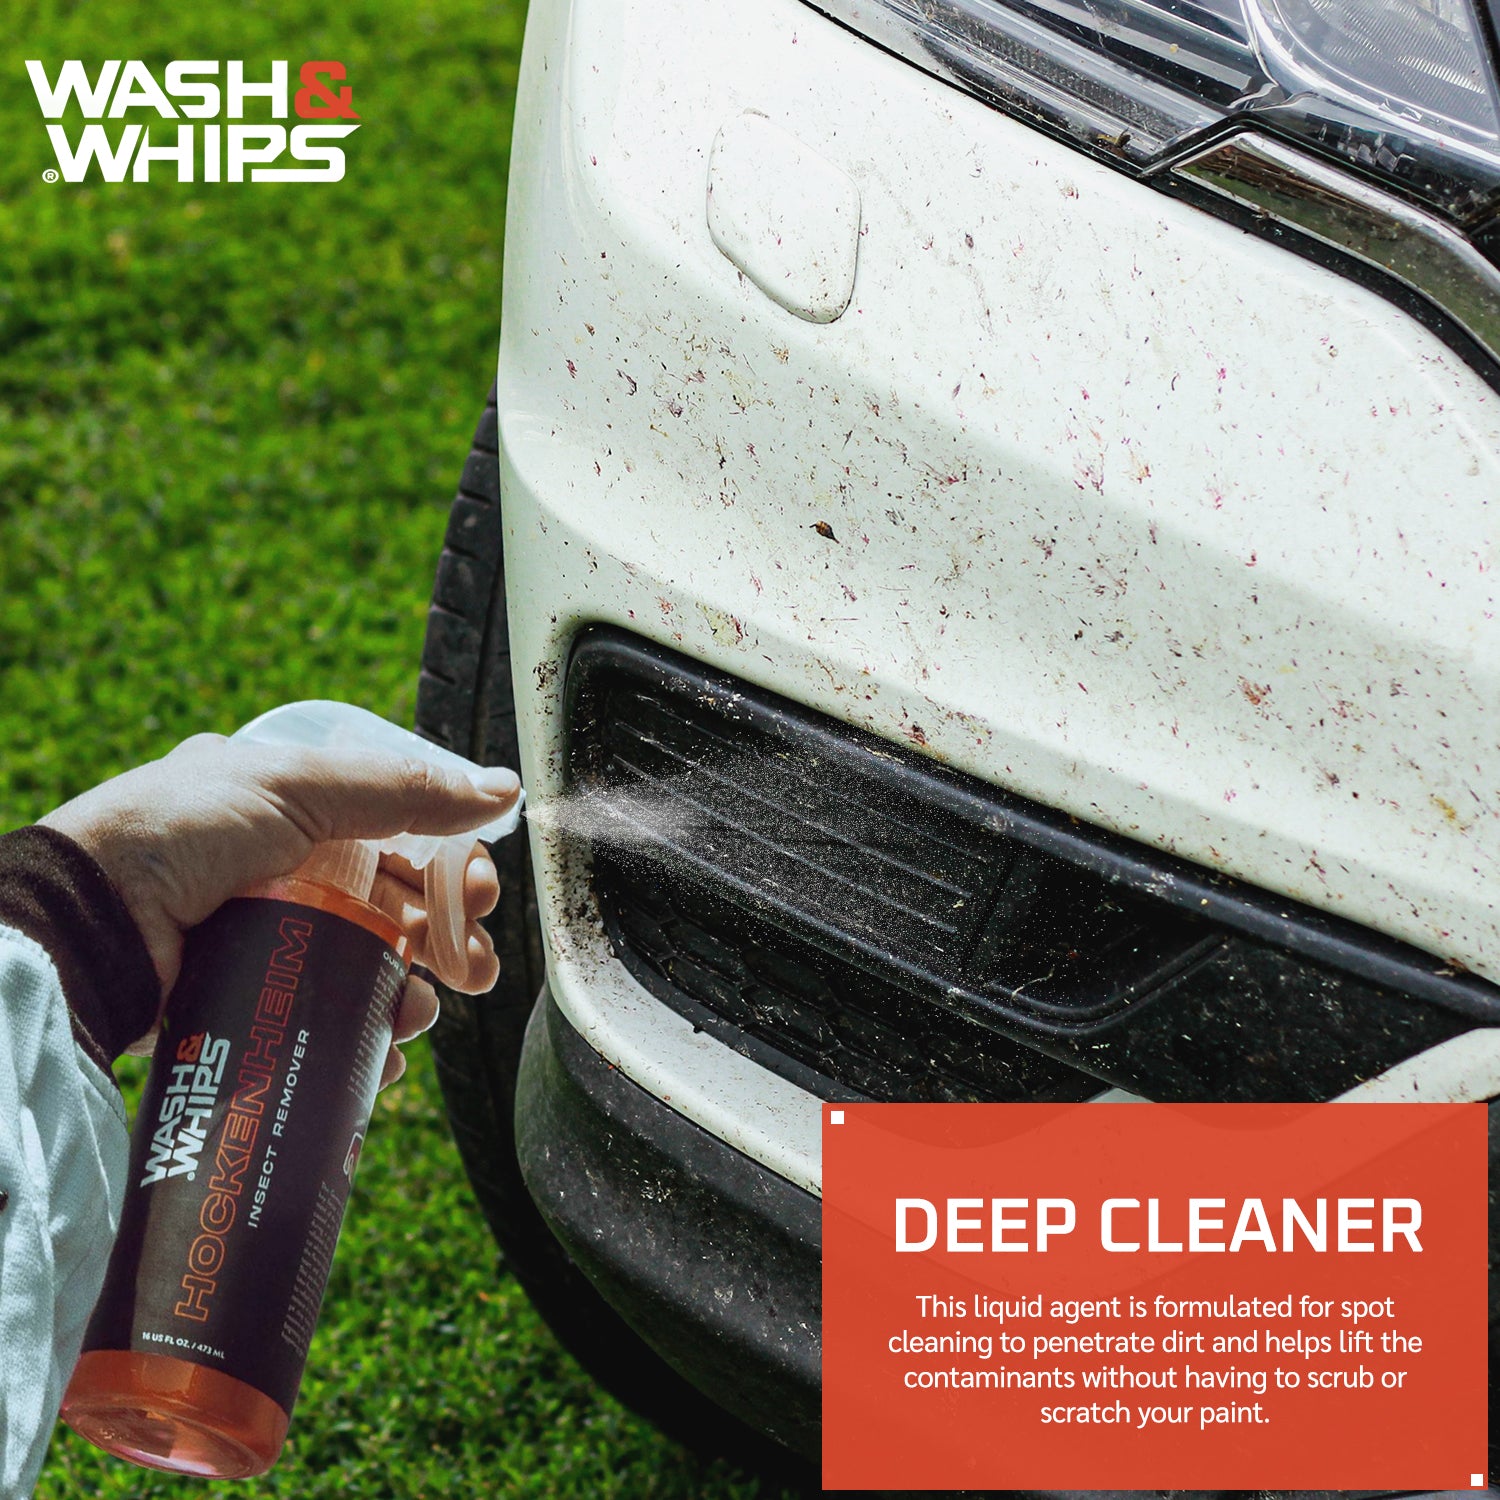 WASH&WHIPS Hockenheim Bug Remover - for Dead Insects, Droppings and Grease for Car Detailing, RVs, Trailers, Boats, Professional Strength Dissolves